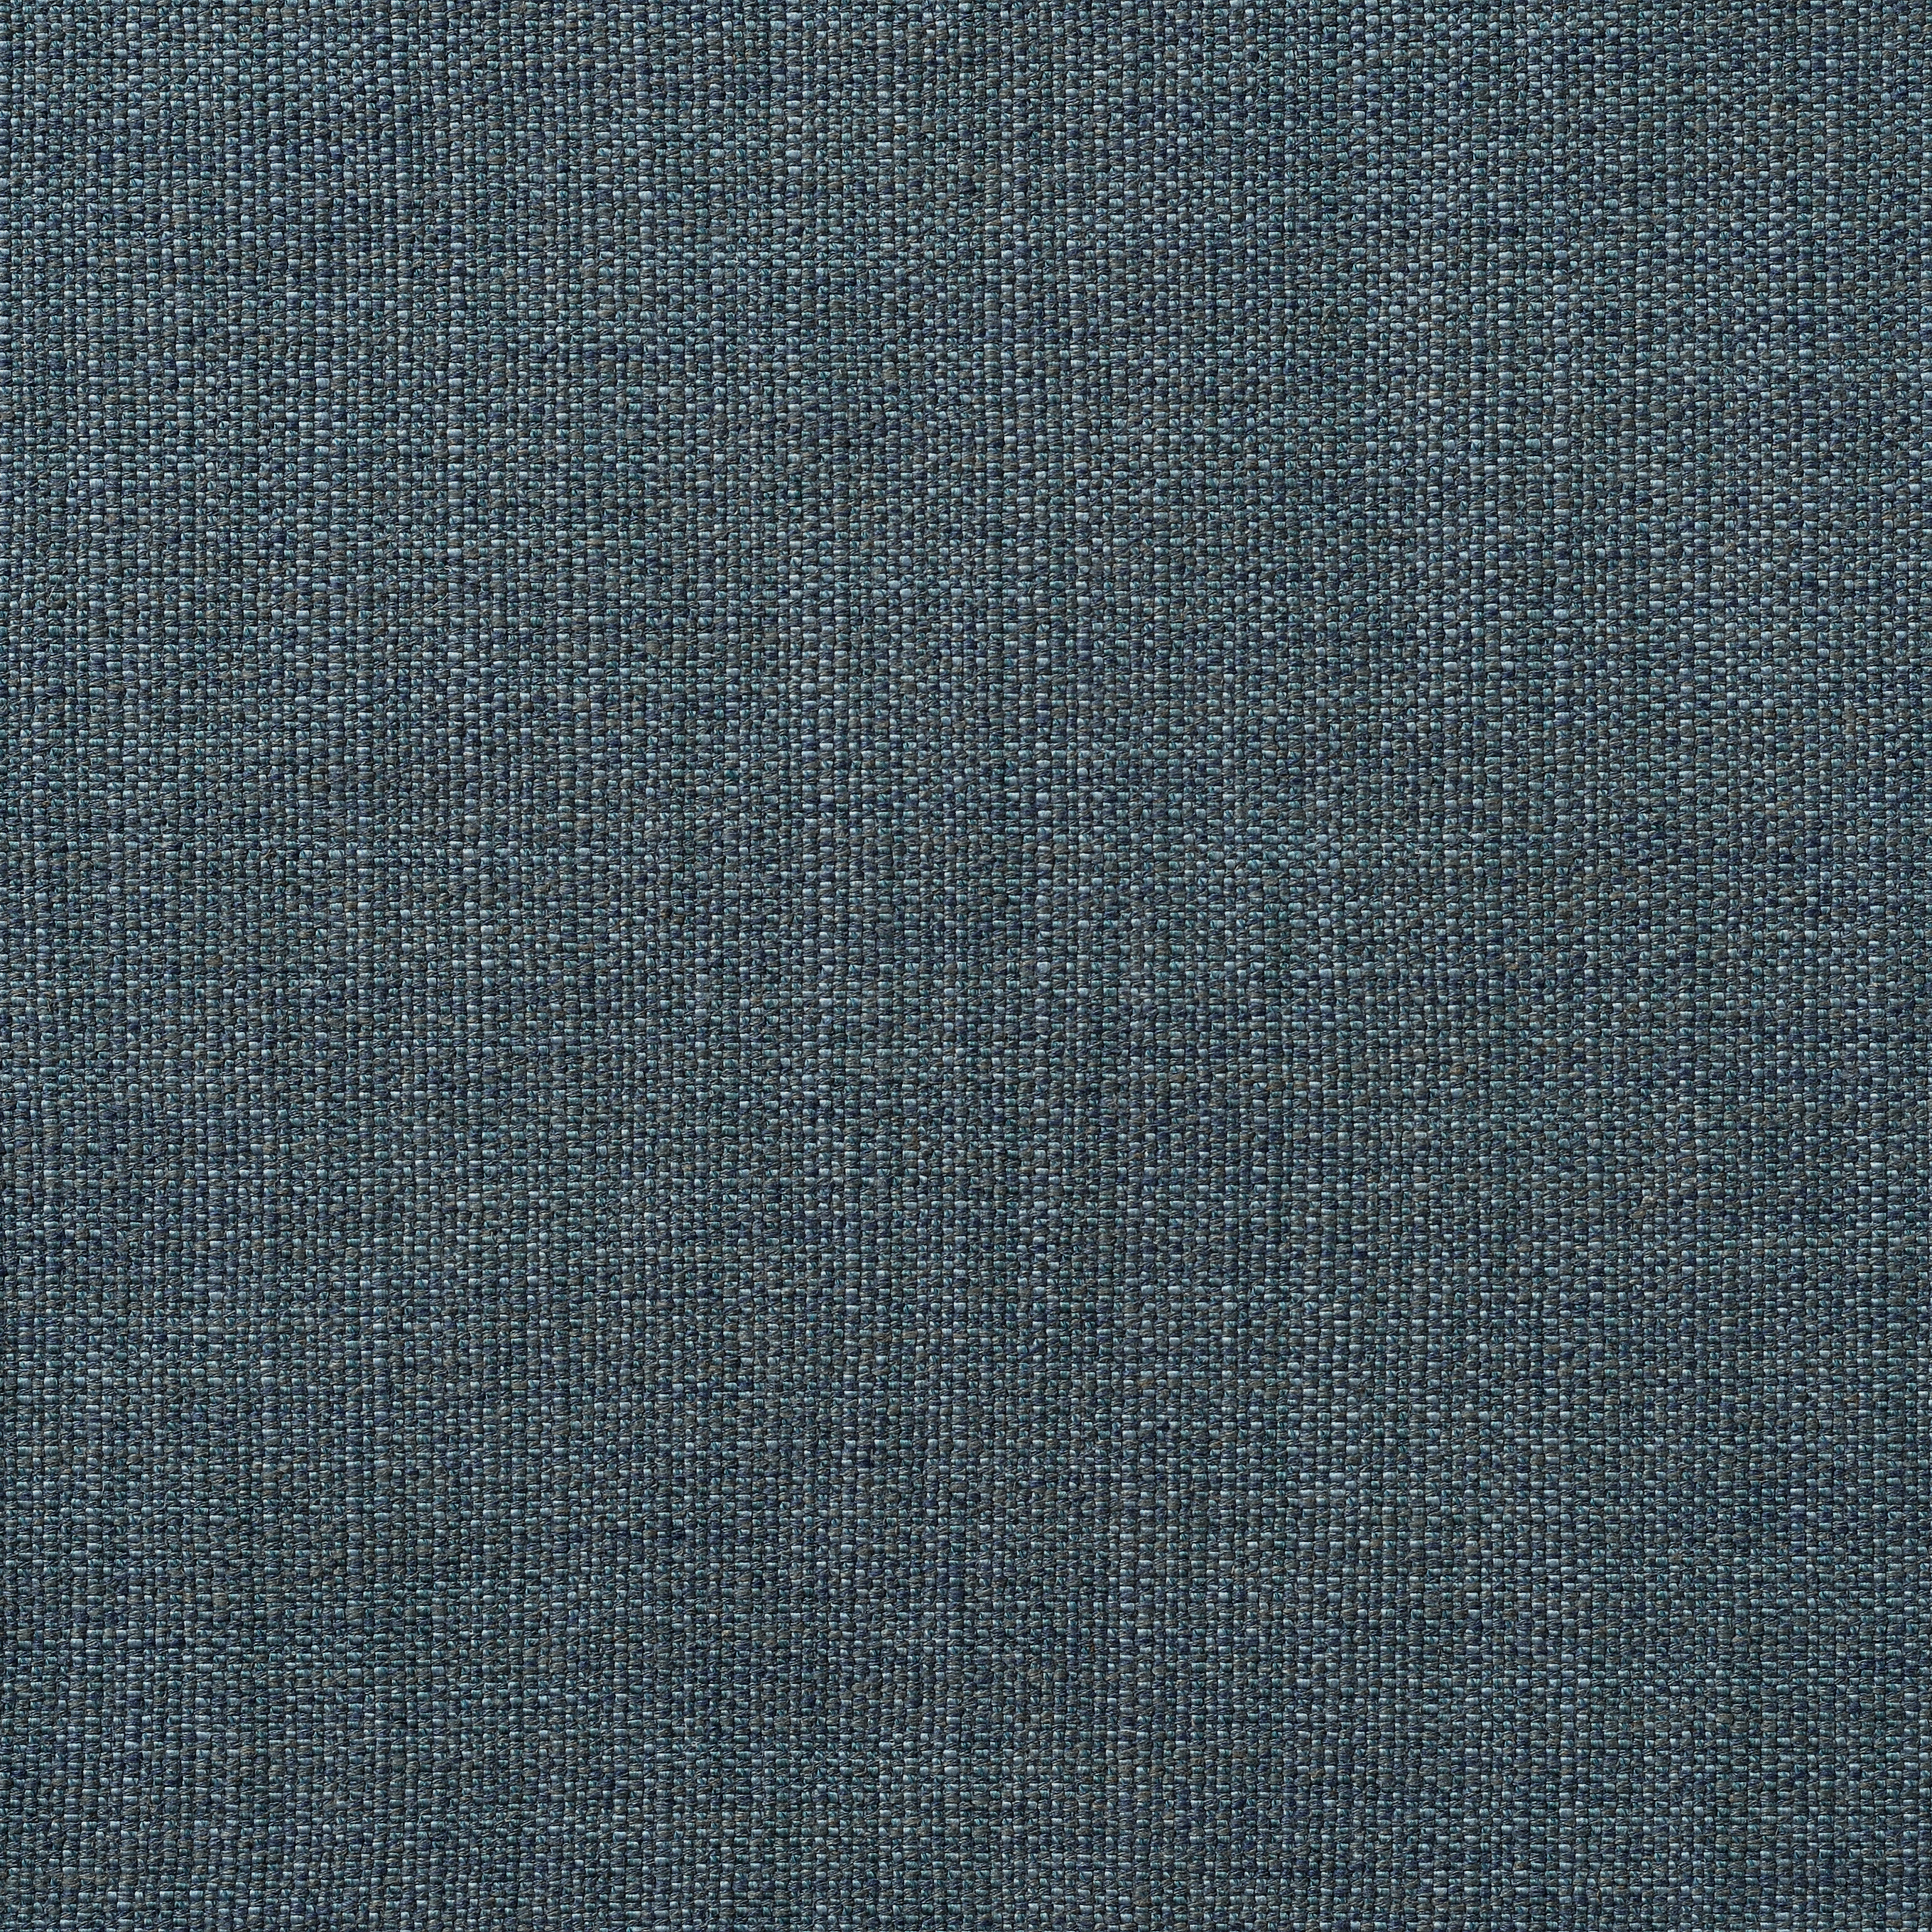 Isabel Small Rustic Weave - Teal Marl